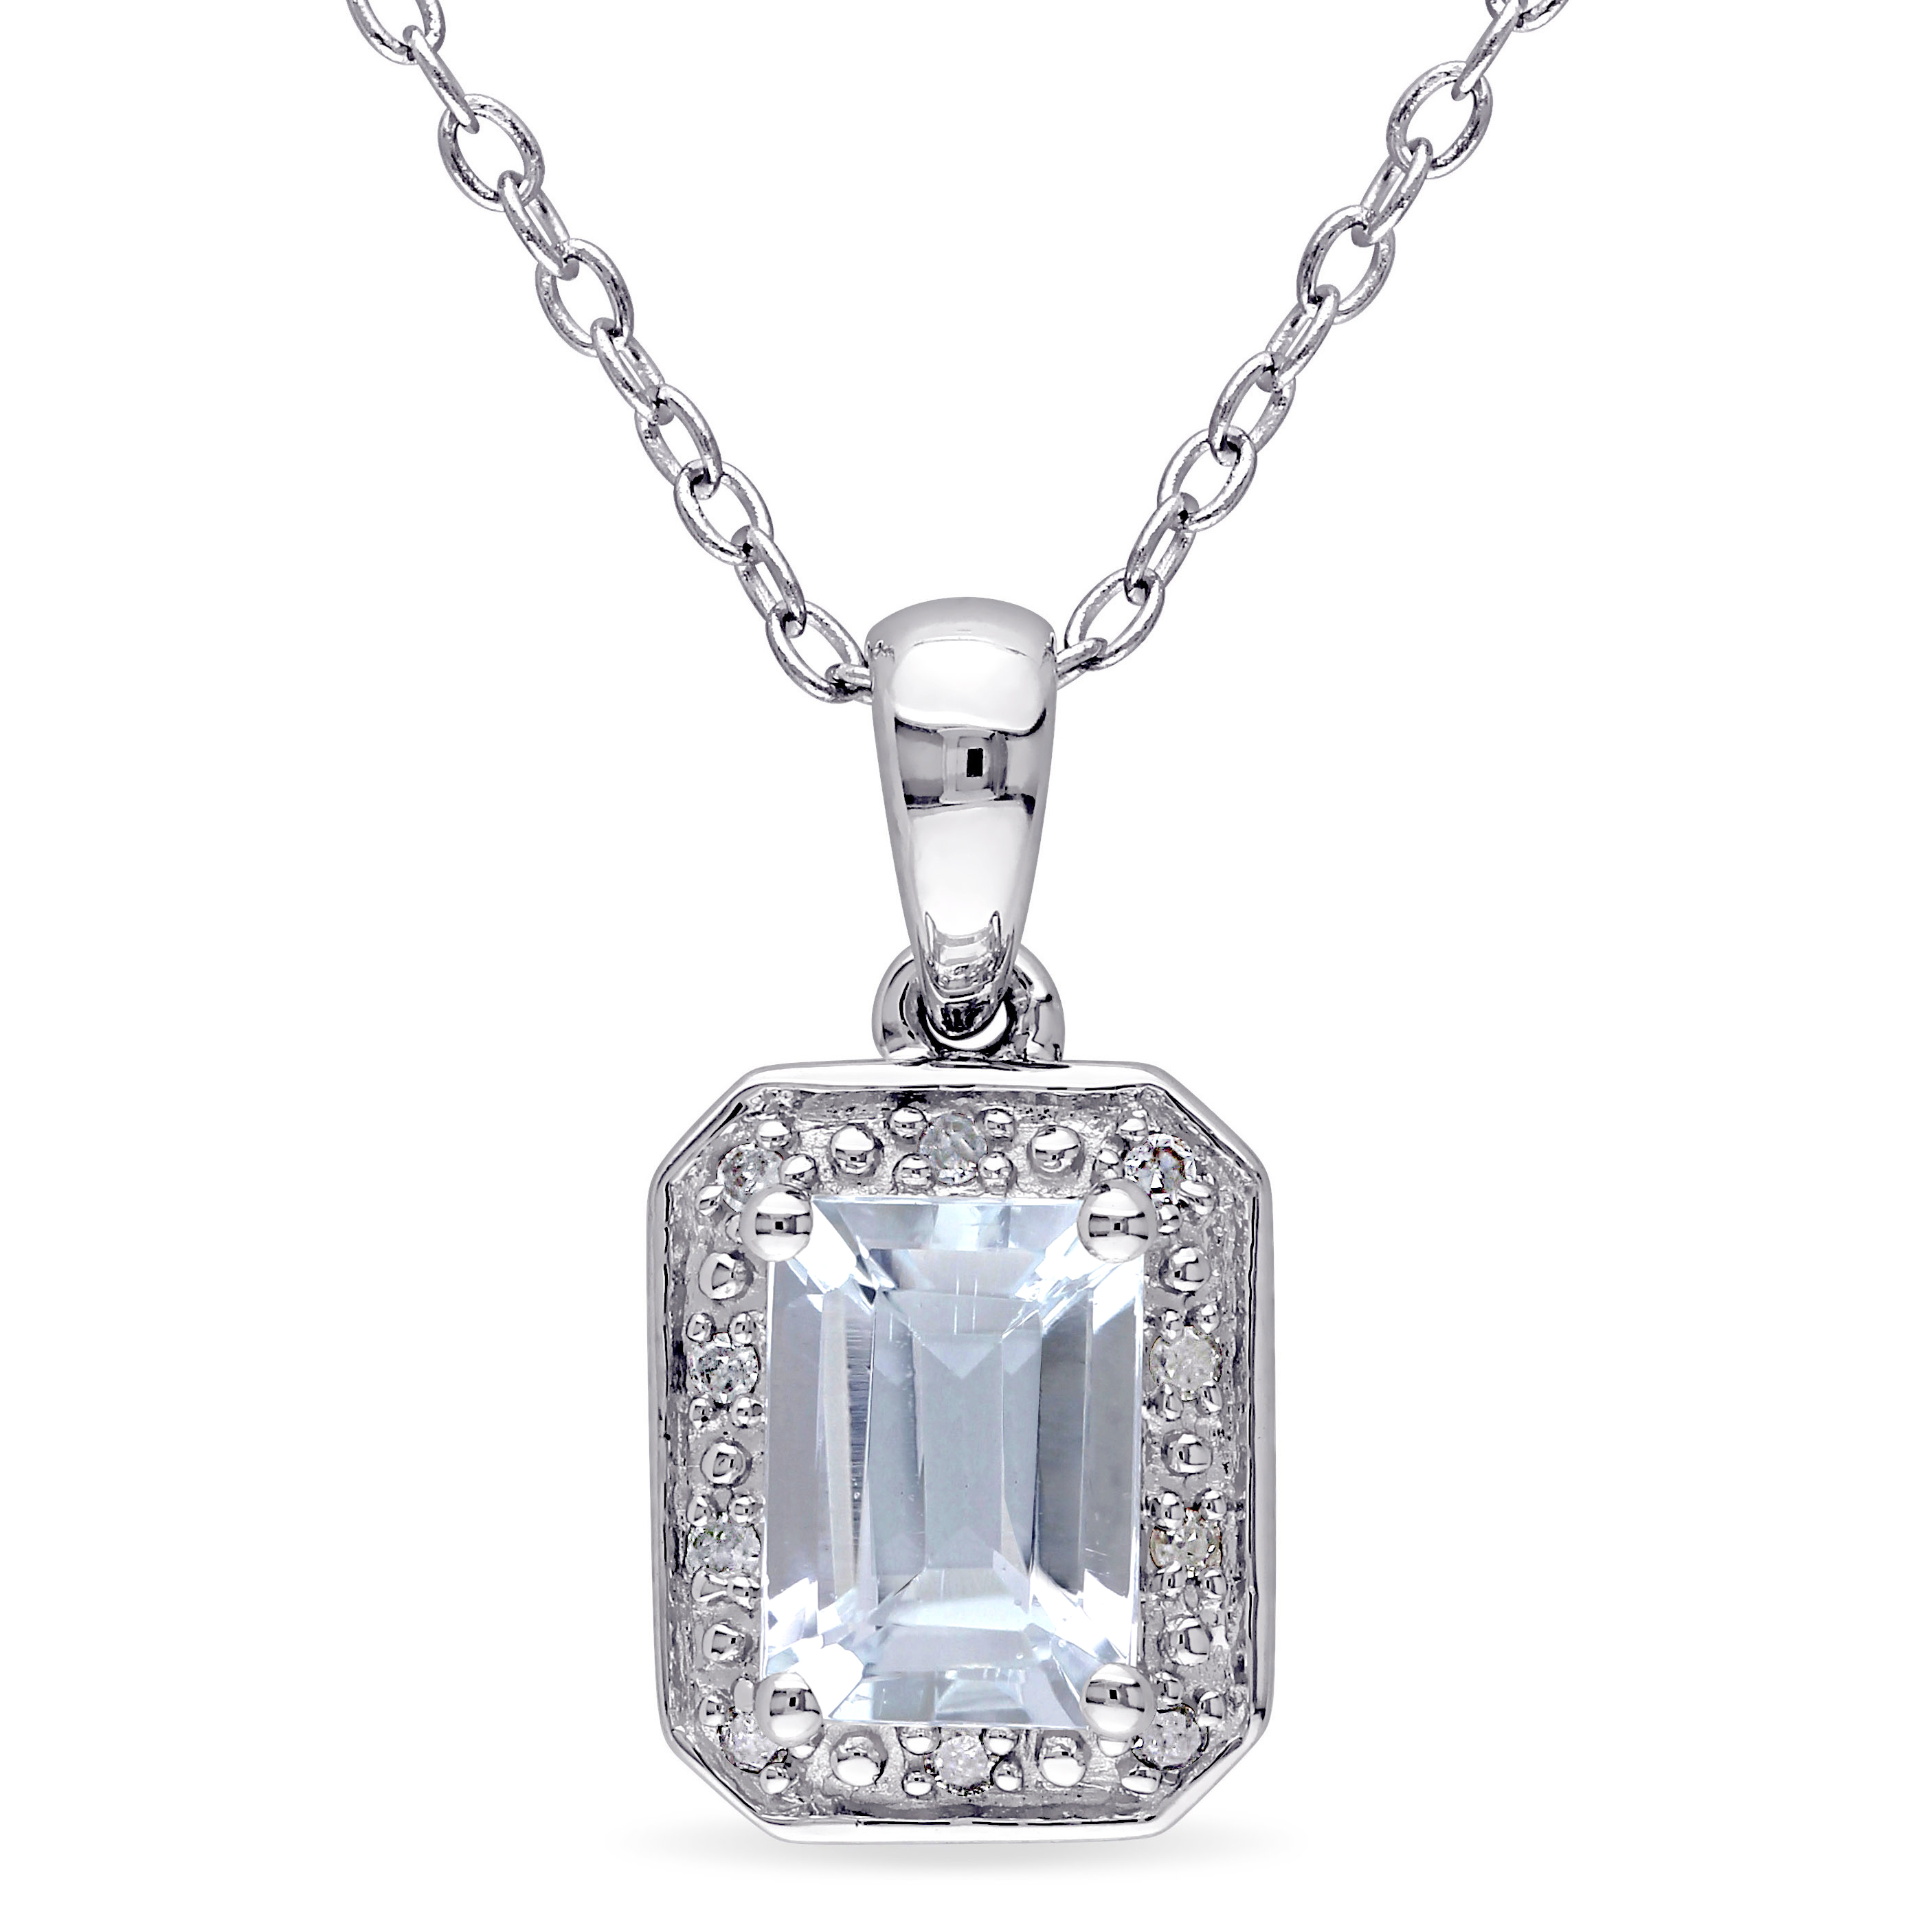 Emerald Cut Aquamarine and Diamond Pendant with Chain in Sterling Silver